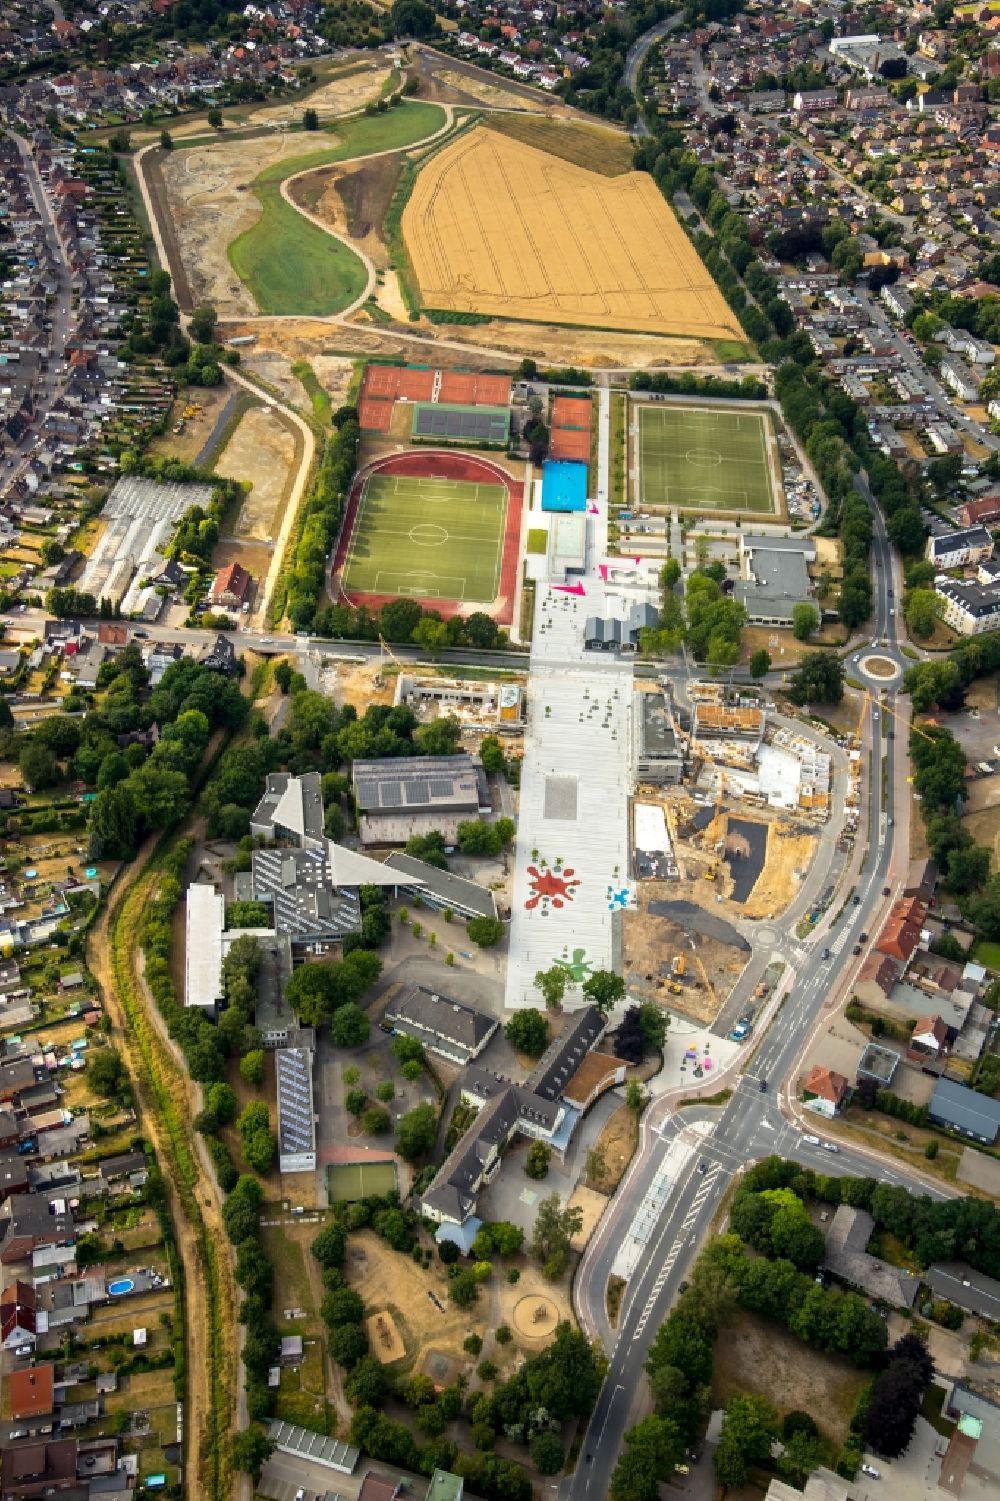 Selm from the bird's eye view: Construction site for the new sports hall in Selm in the state North Rhine-Westphalia, Germany